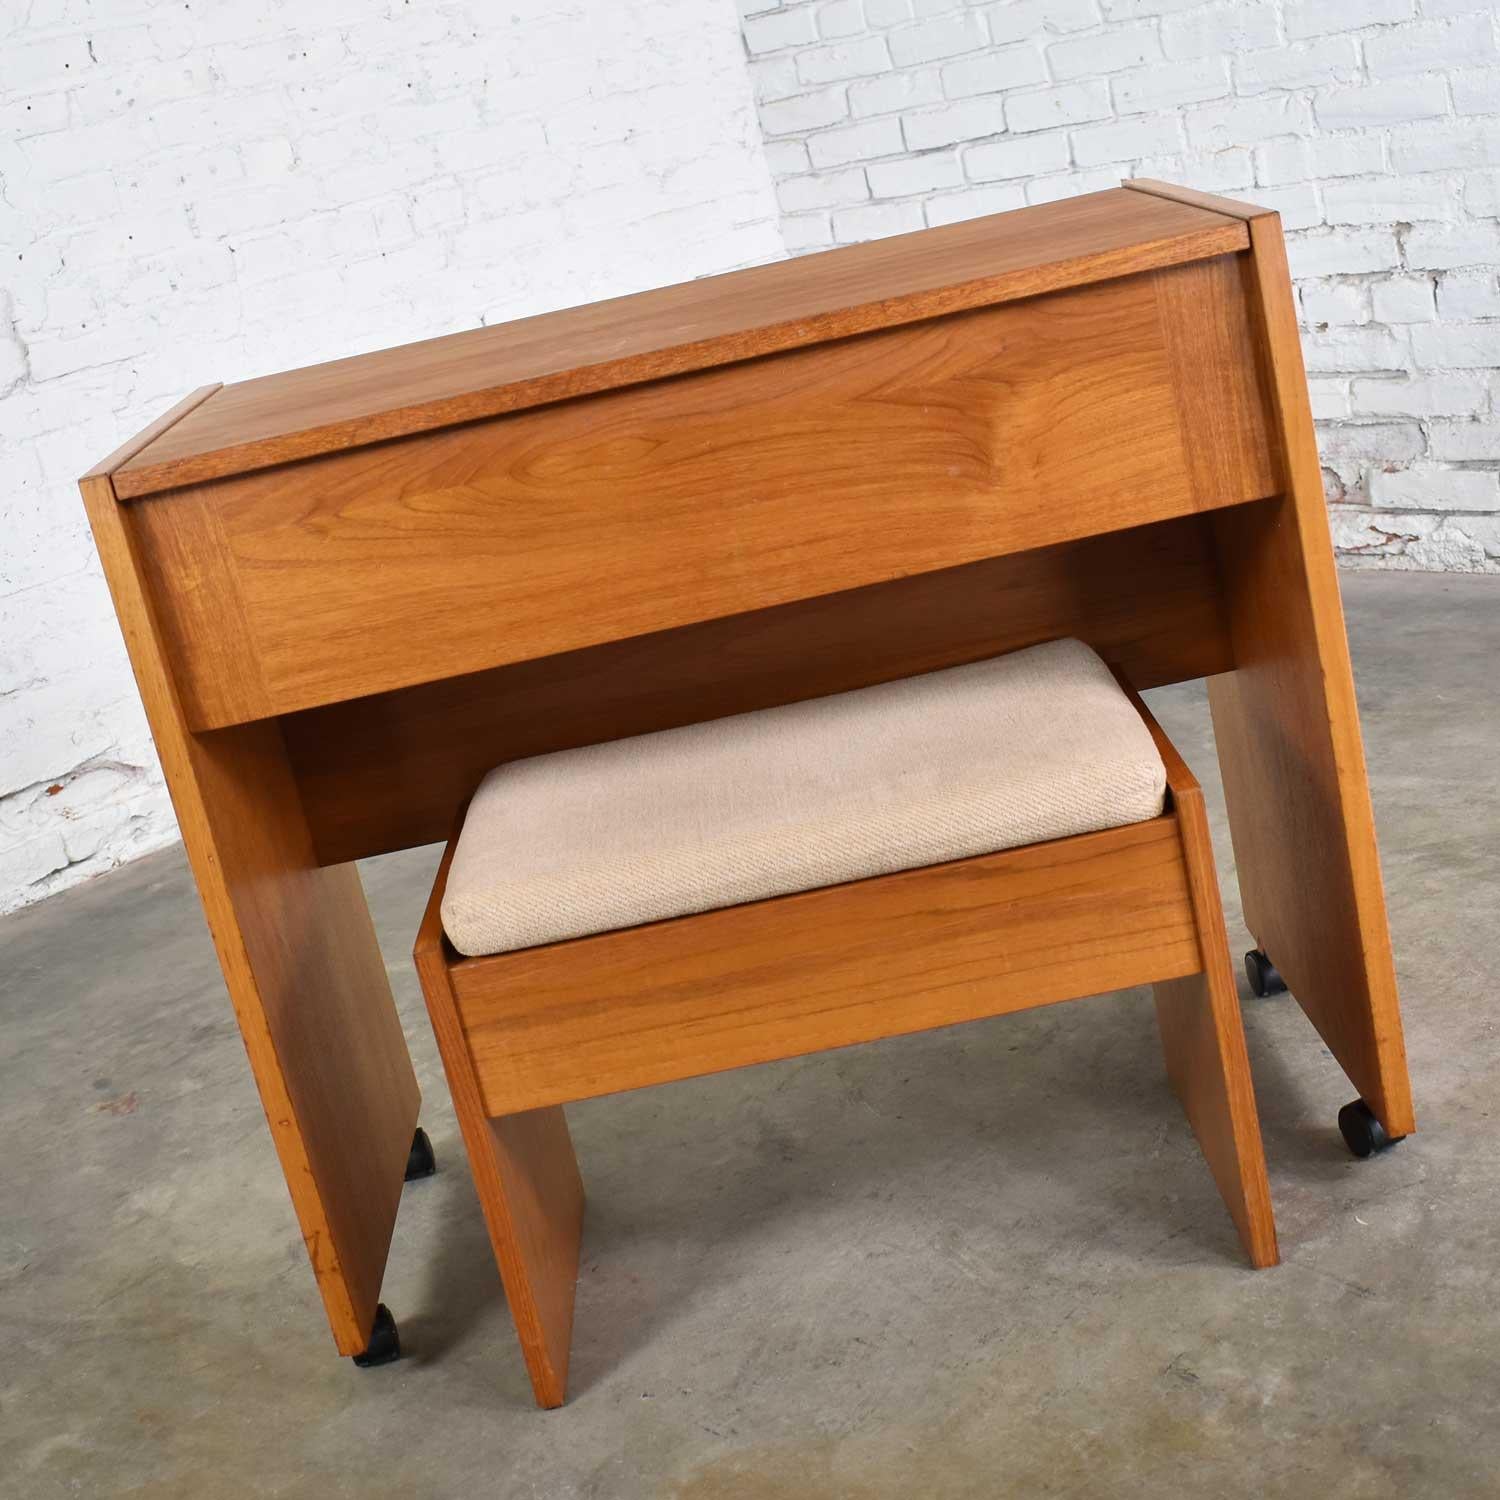 Awesome Scandinavian Modern rolling make up vanity and bench in teak with flip open mirror and storage. It is in wonderful vintage condition. The finish has been restored and given a coat of poly. It has no outstanding flaws that we have found but